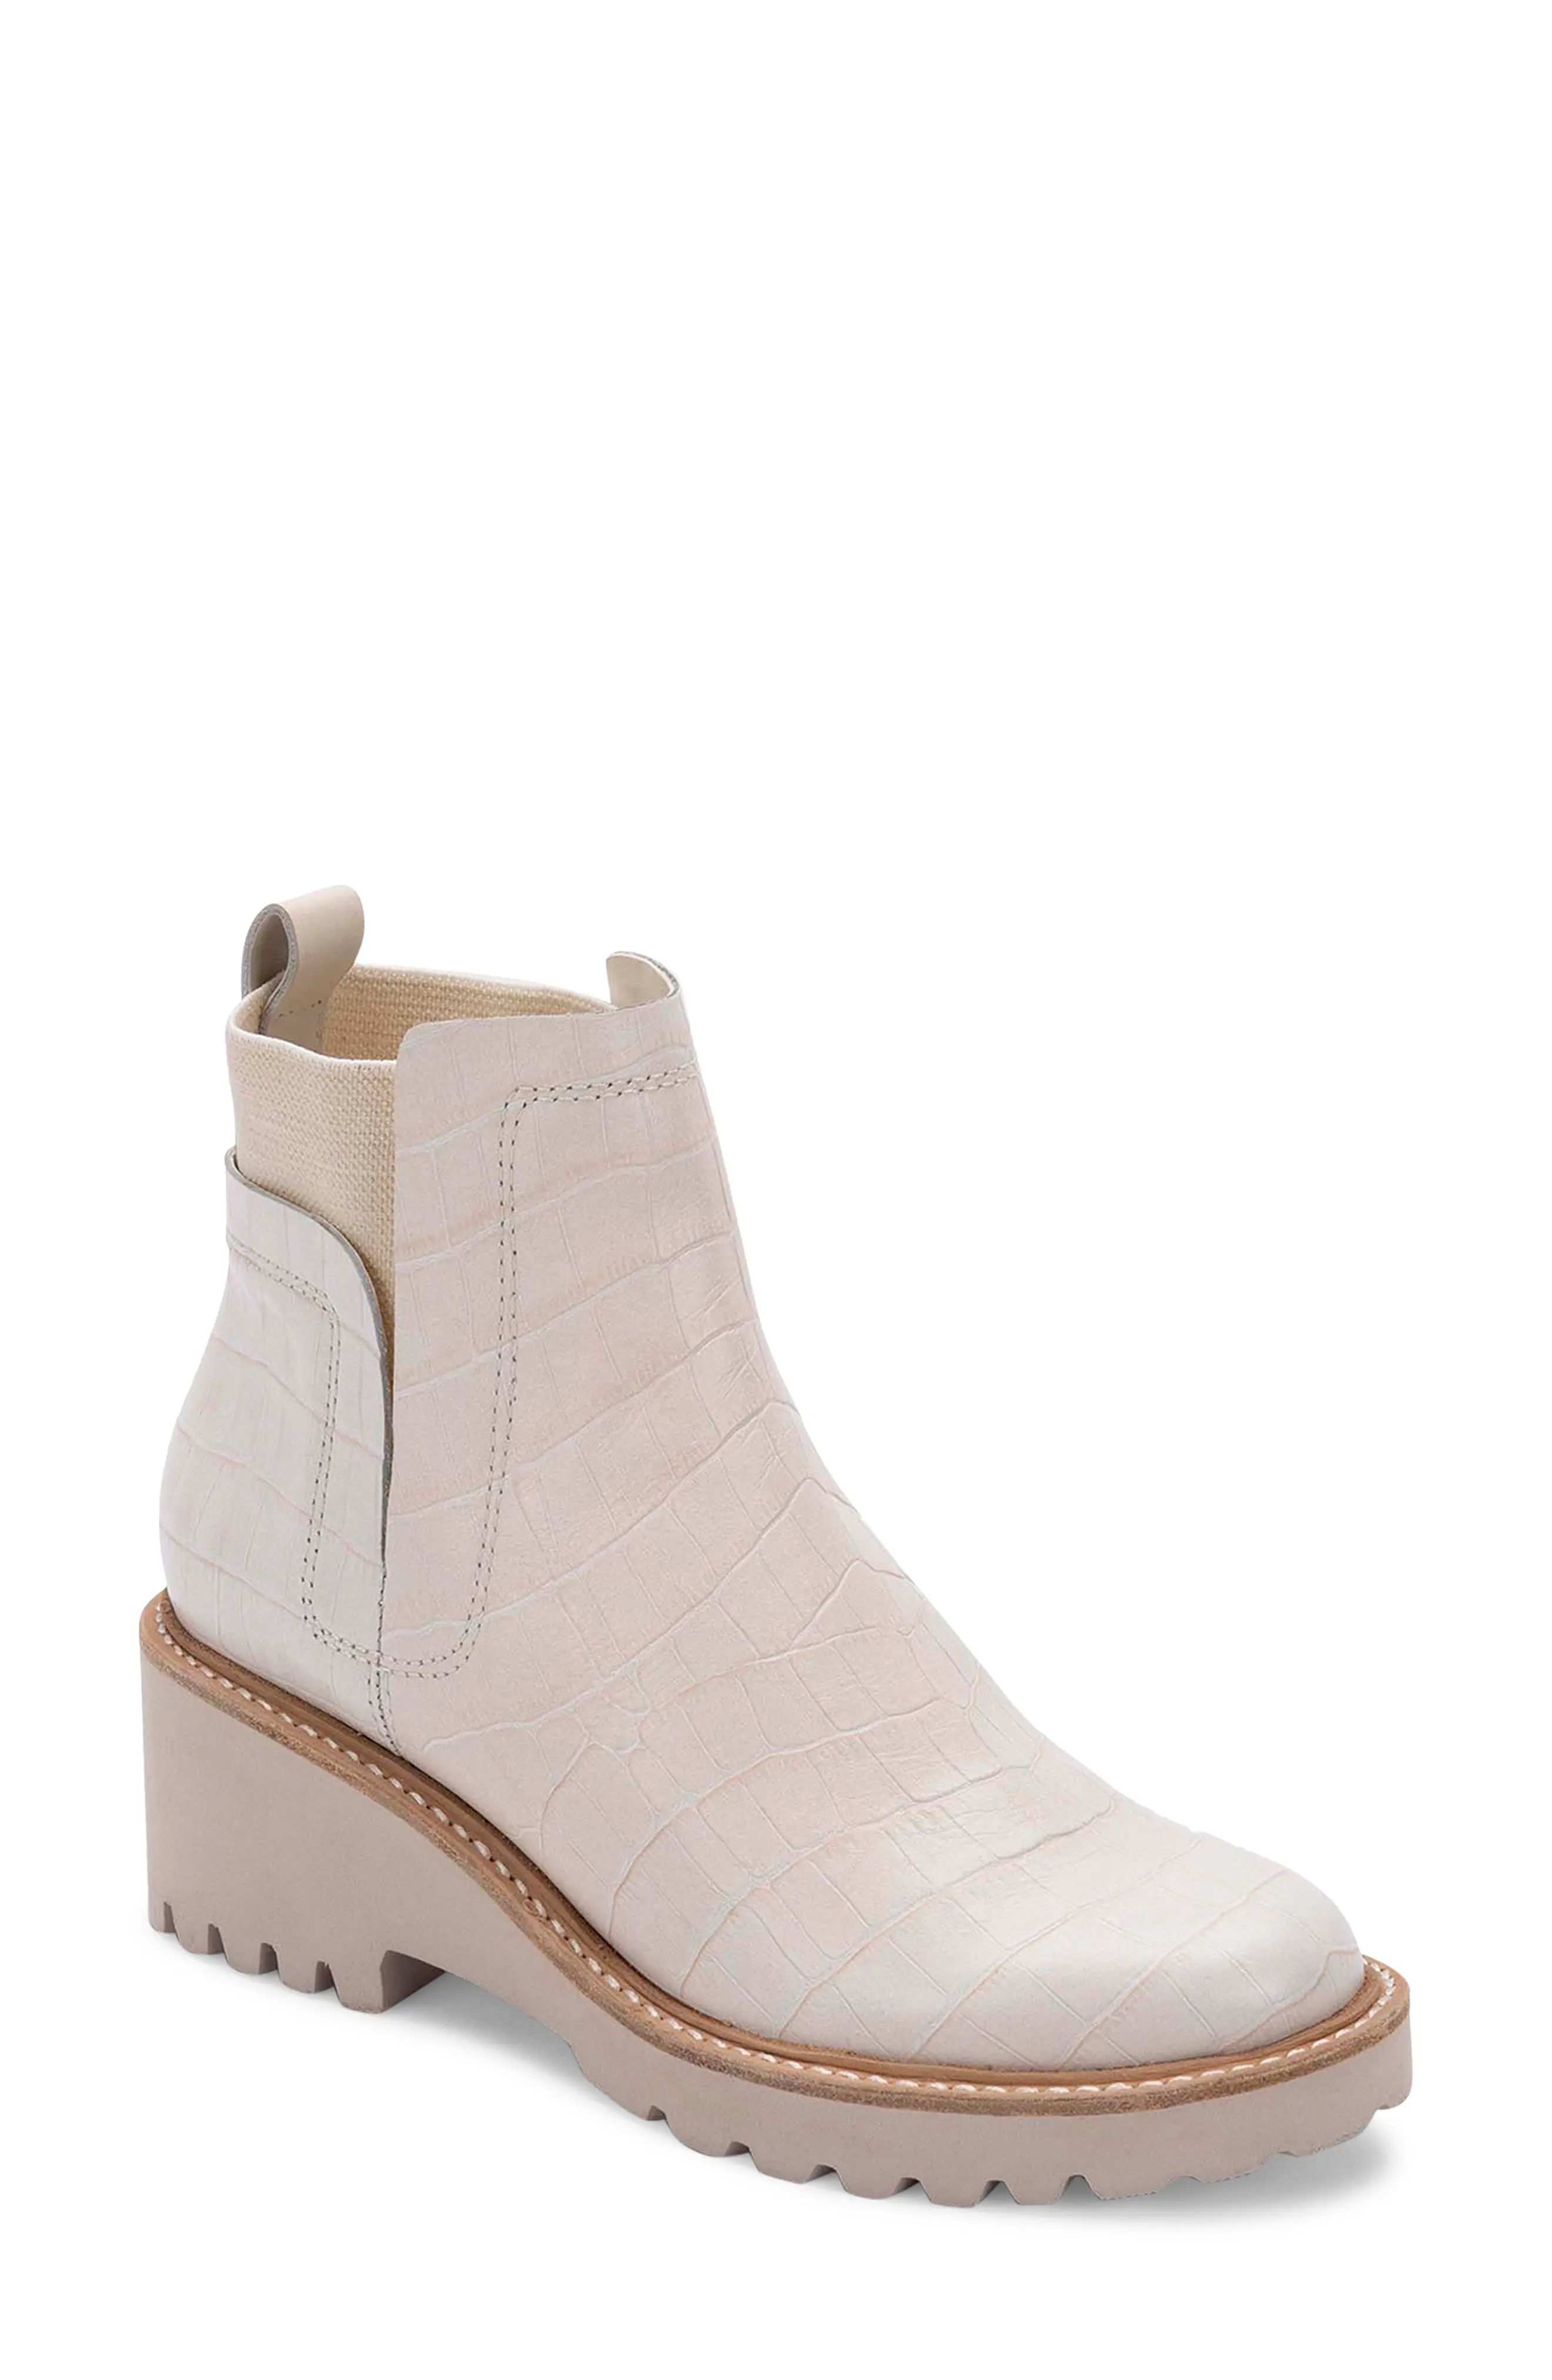 Dolce Vita Huey Bootie in Ivory Croco Print Leather at Nordstrom, Size 8 | Nordstrom